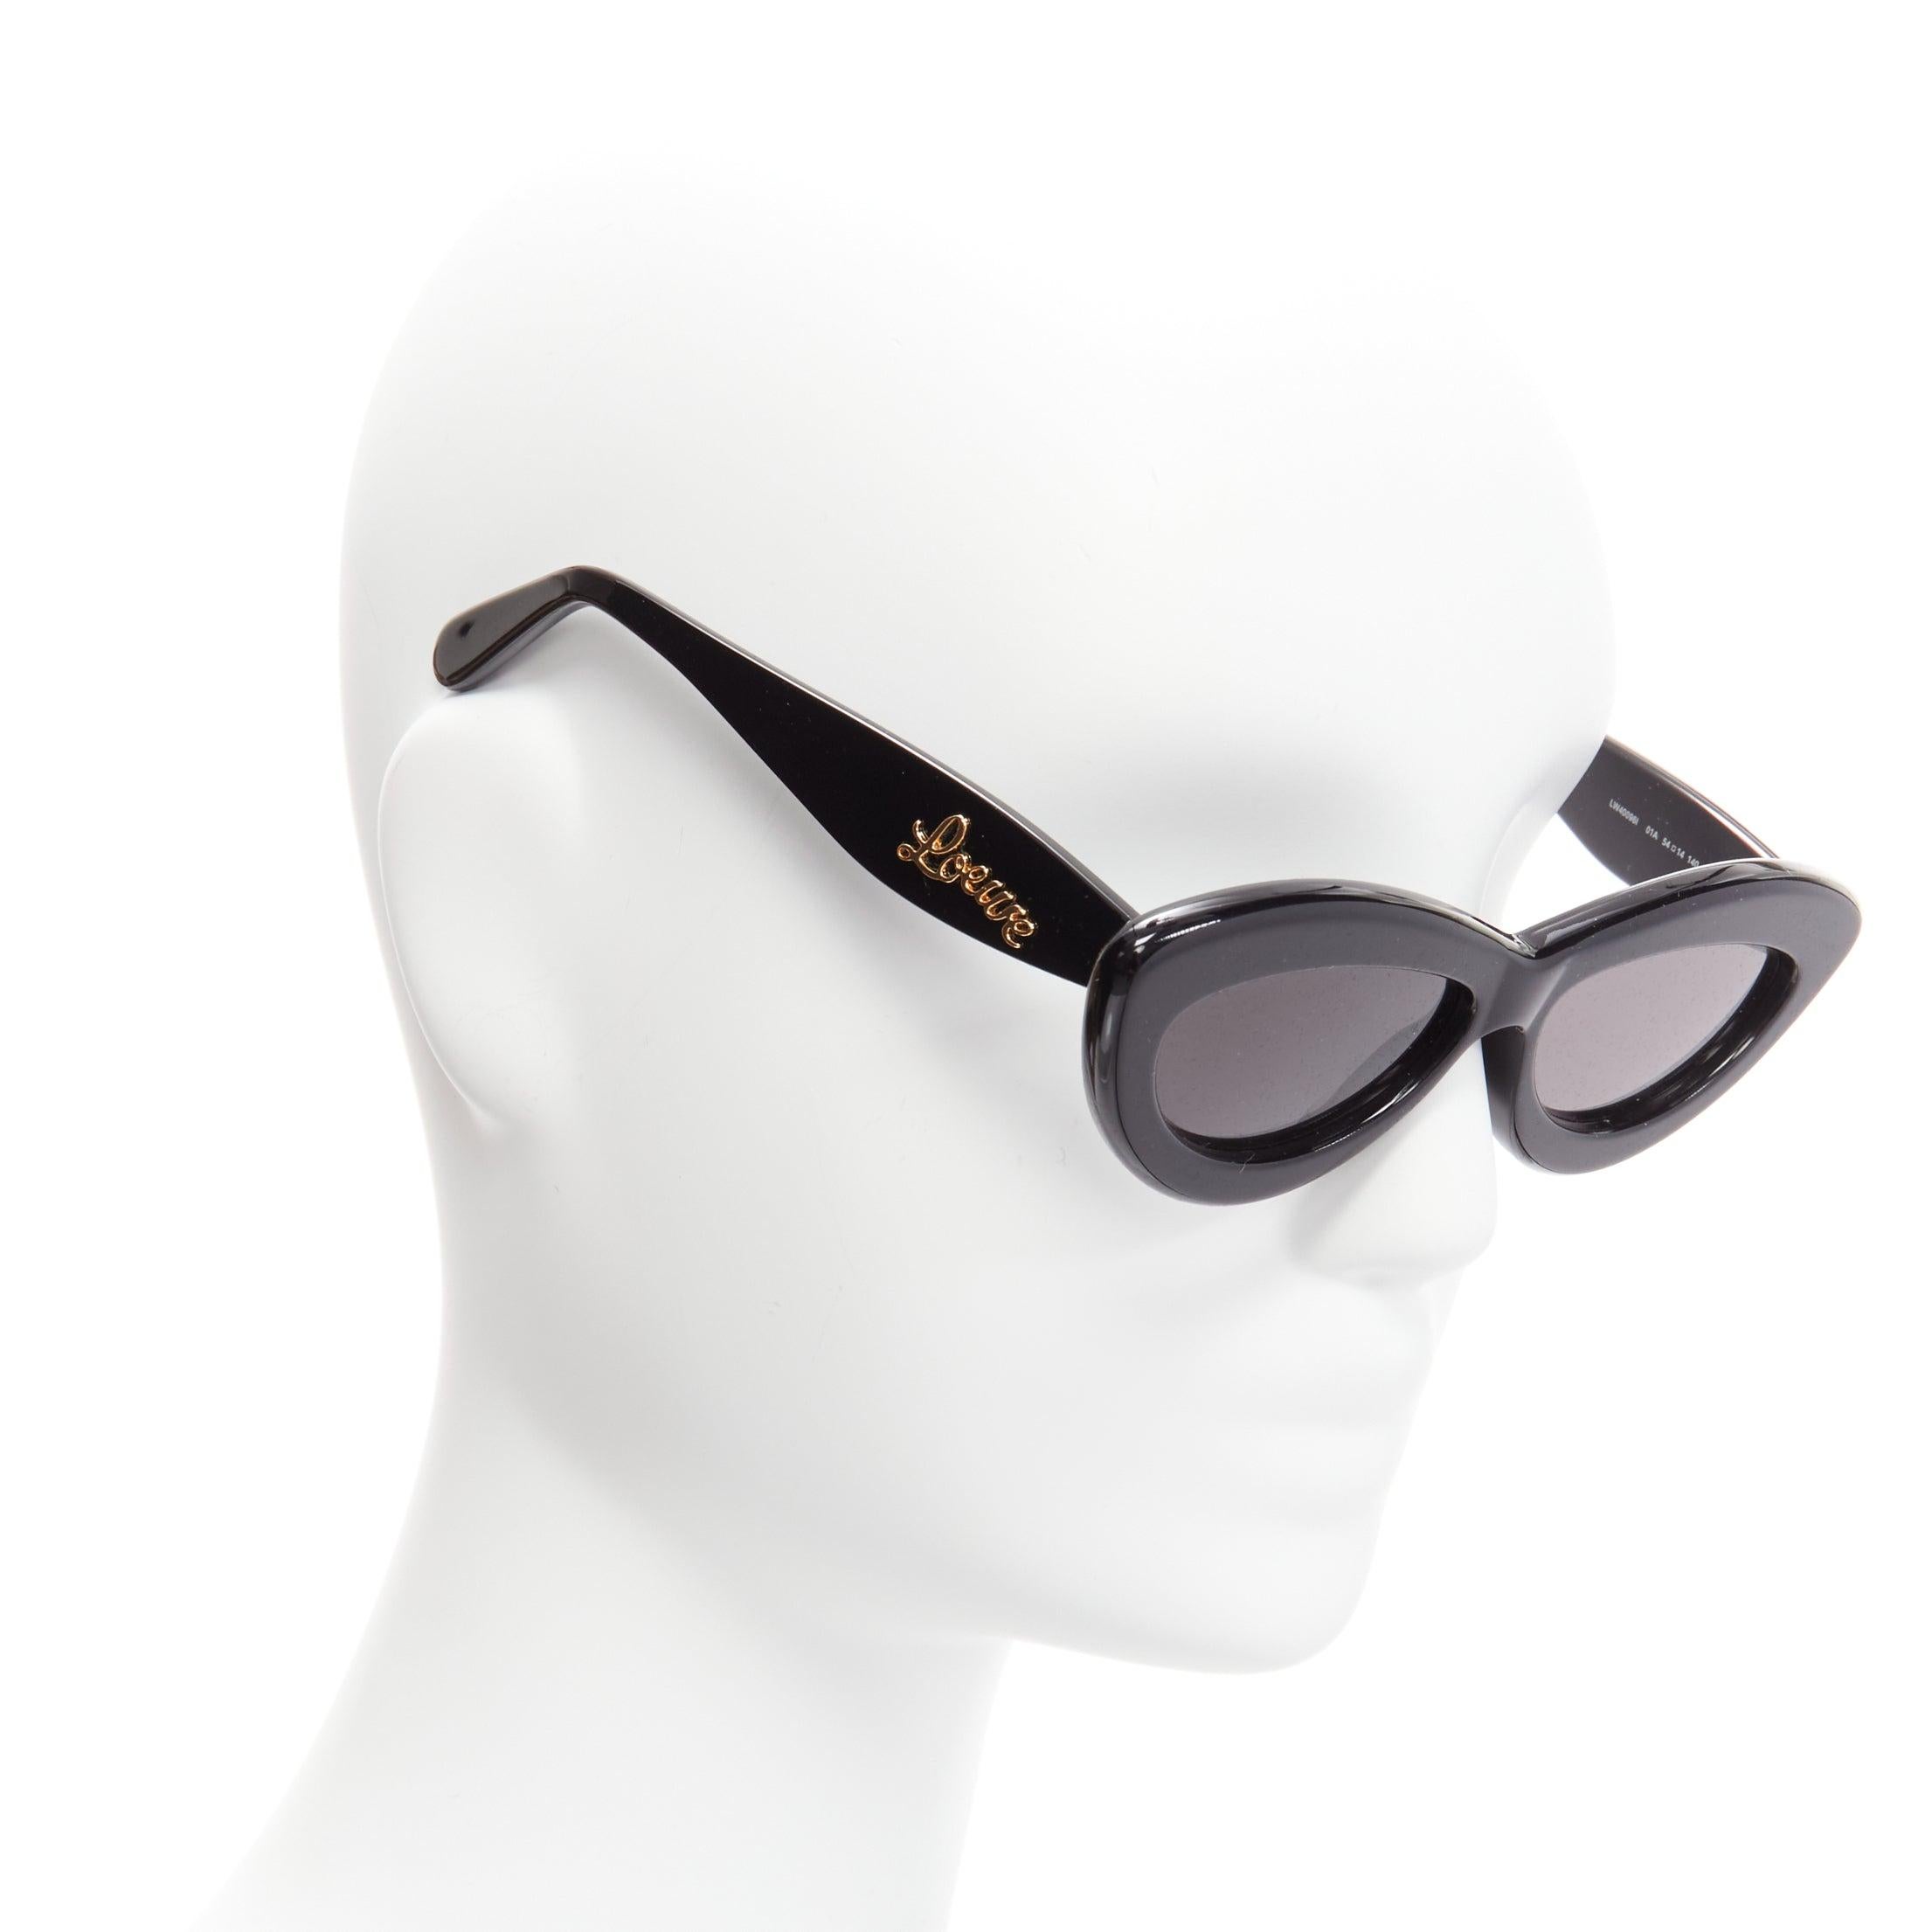 LOEWE LW400961 black acetate gold cursive logo thick frame cat eye sunglasses
Reference: LNKO/A02196
Brand: Loewe
Designer: JW Anderson
Model: LW400961
Material: Acetate
Color: Black, Gold
Pattern: Solid
Extra Details: Logo on arms.
Made in: